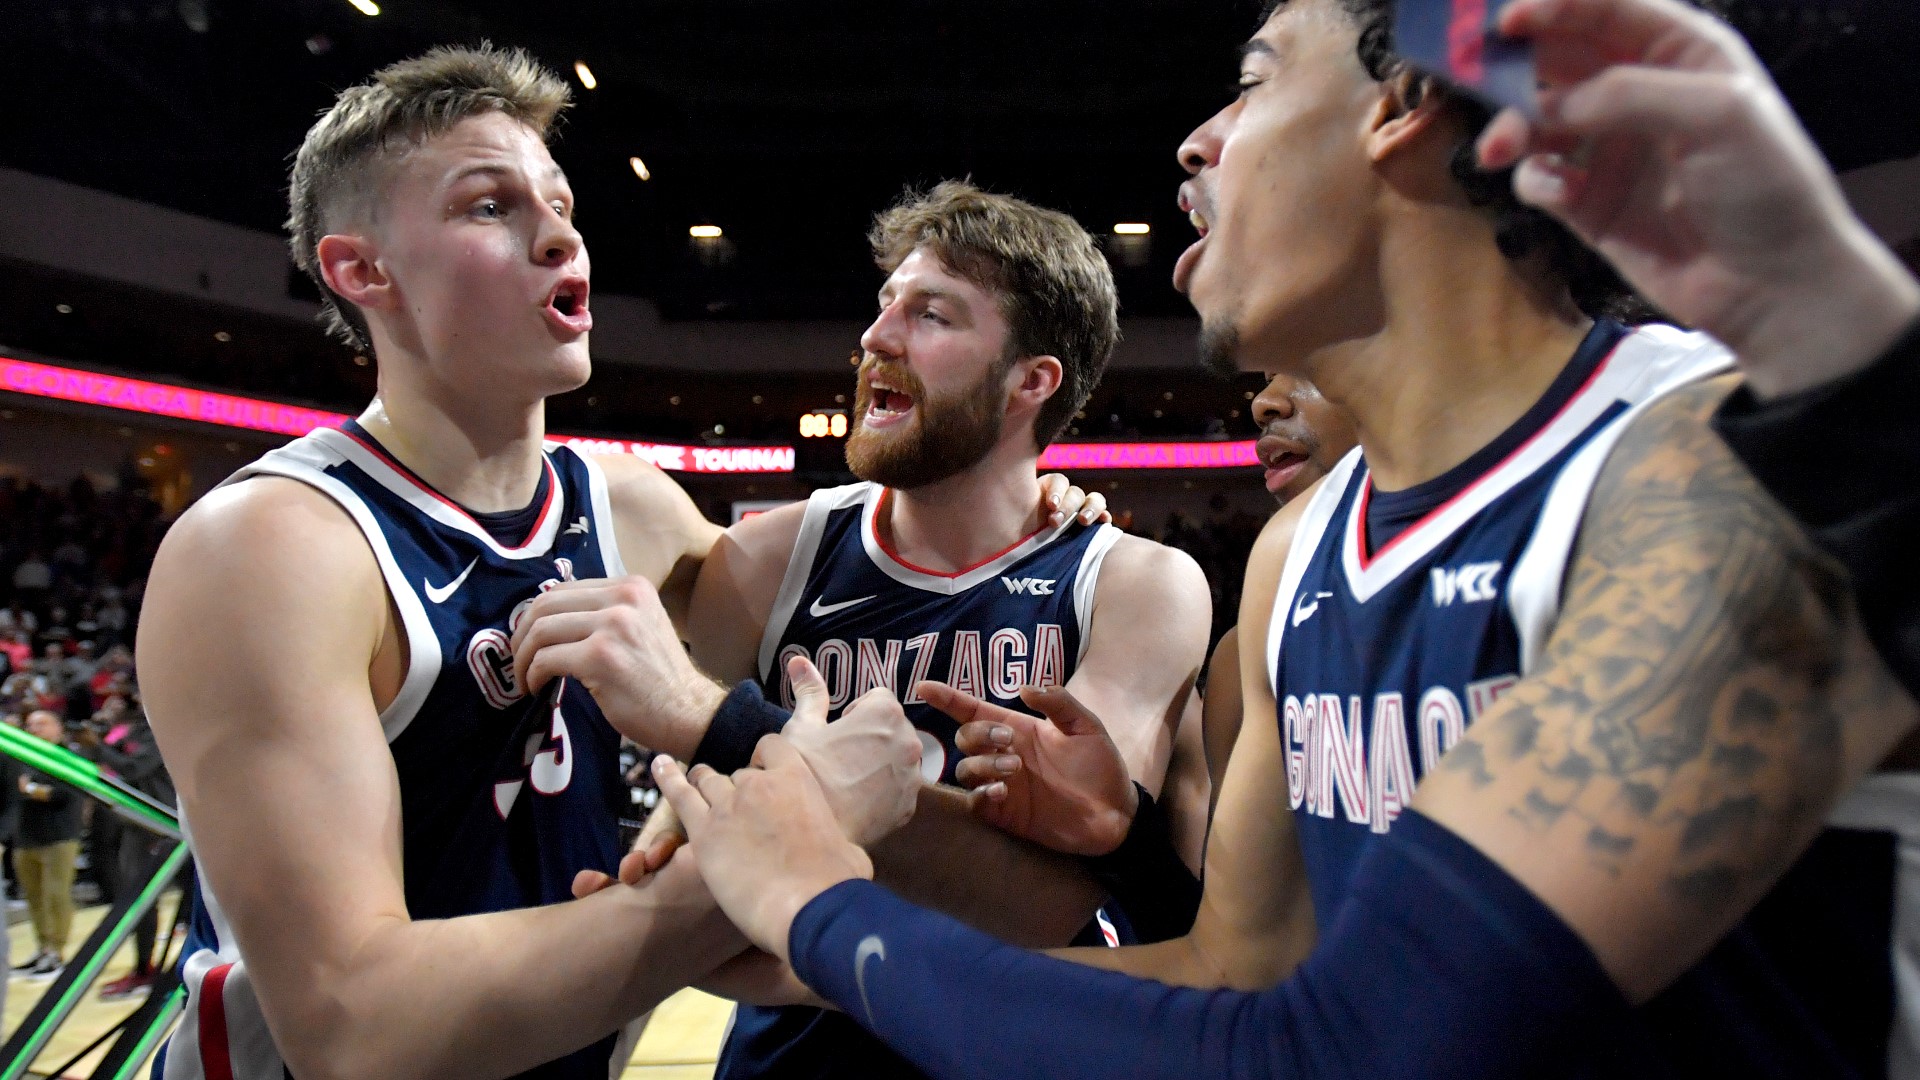 Hear from Gonzaga coach Mark Few, Drew Timme, Julian Strawther, and others as the Zags prepare for the 2023 NCAA Tournament.